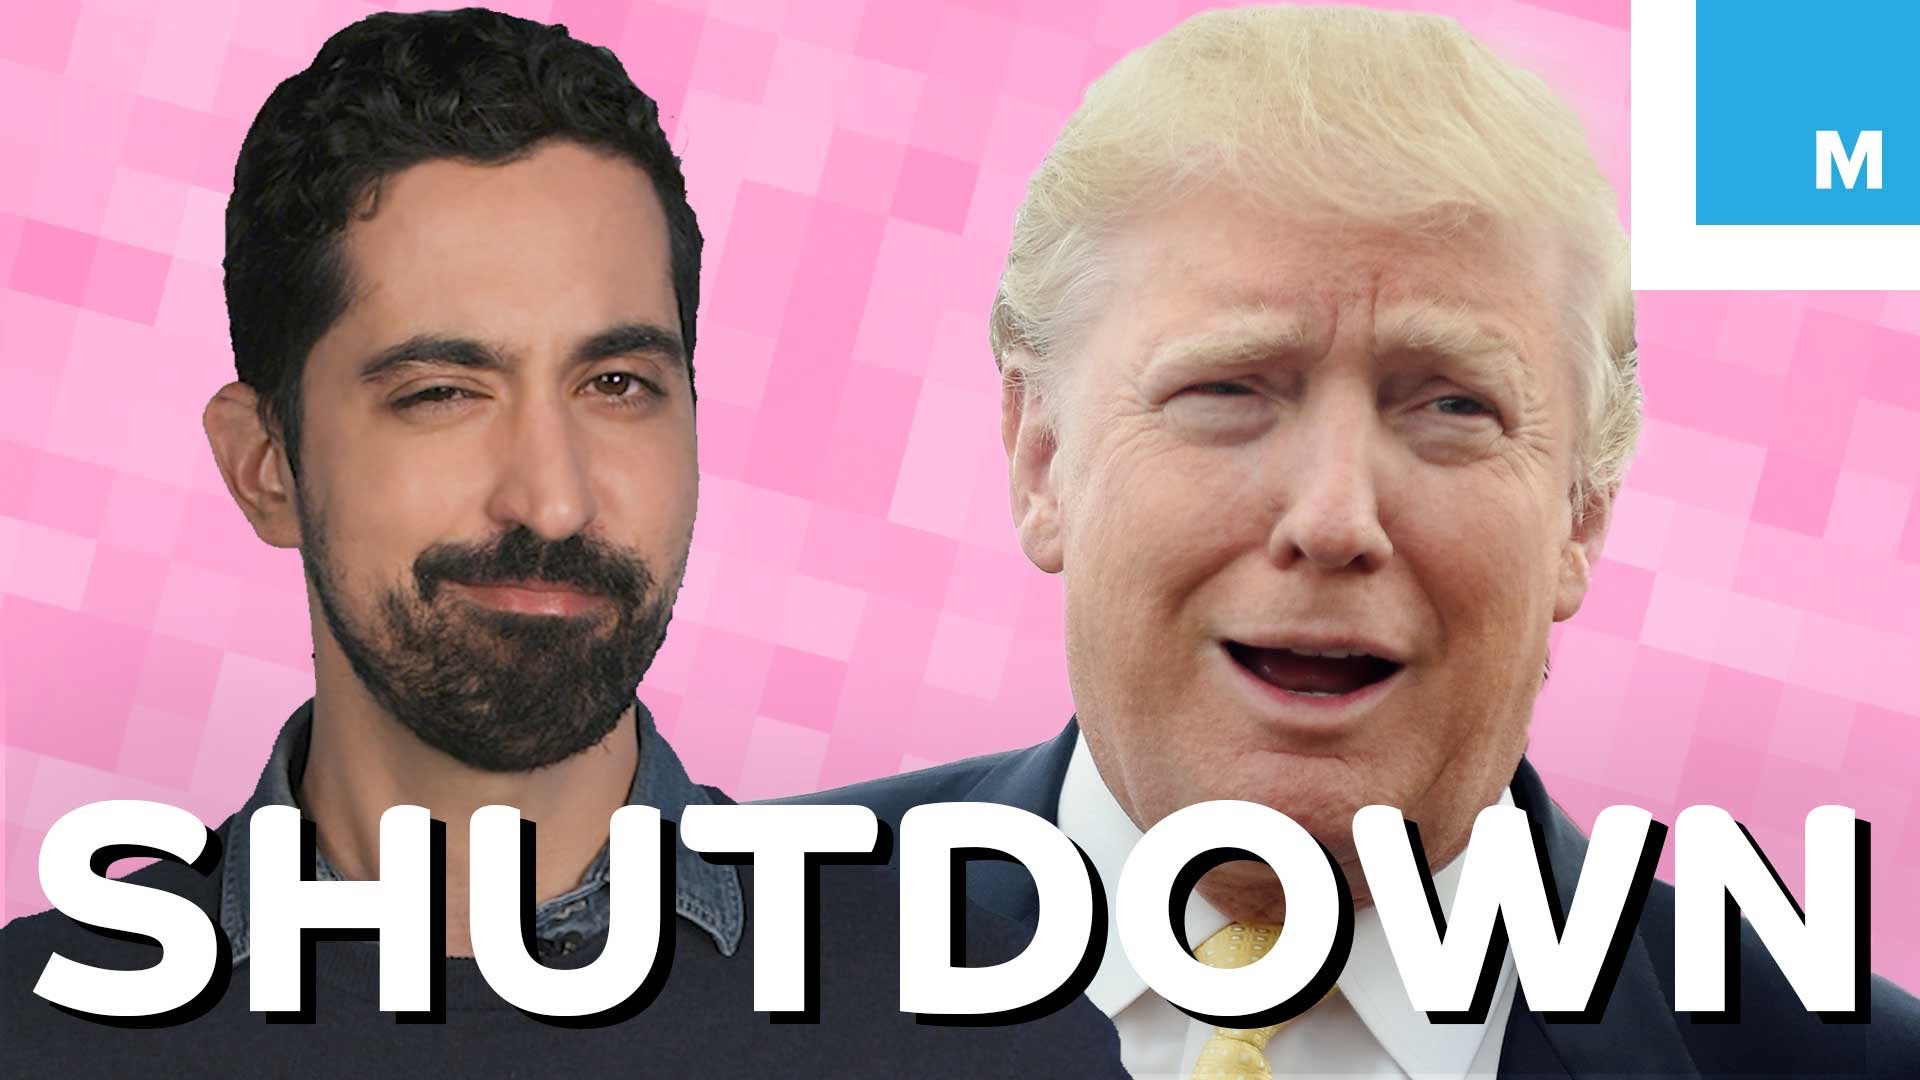 Can Donald Trump Turn Off the Internet? [Video]